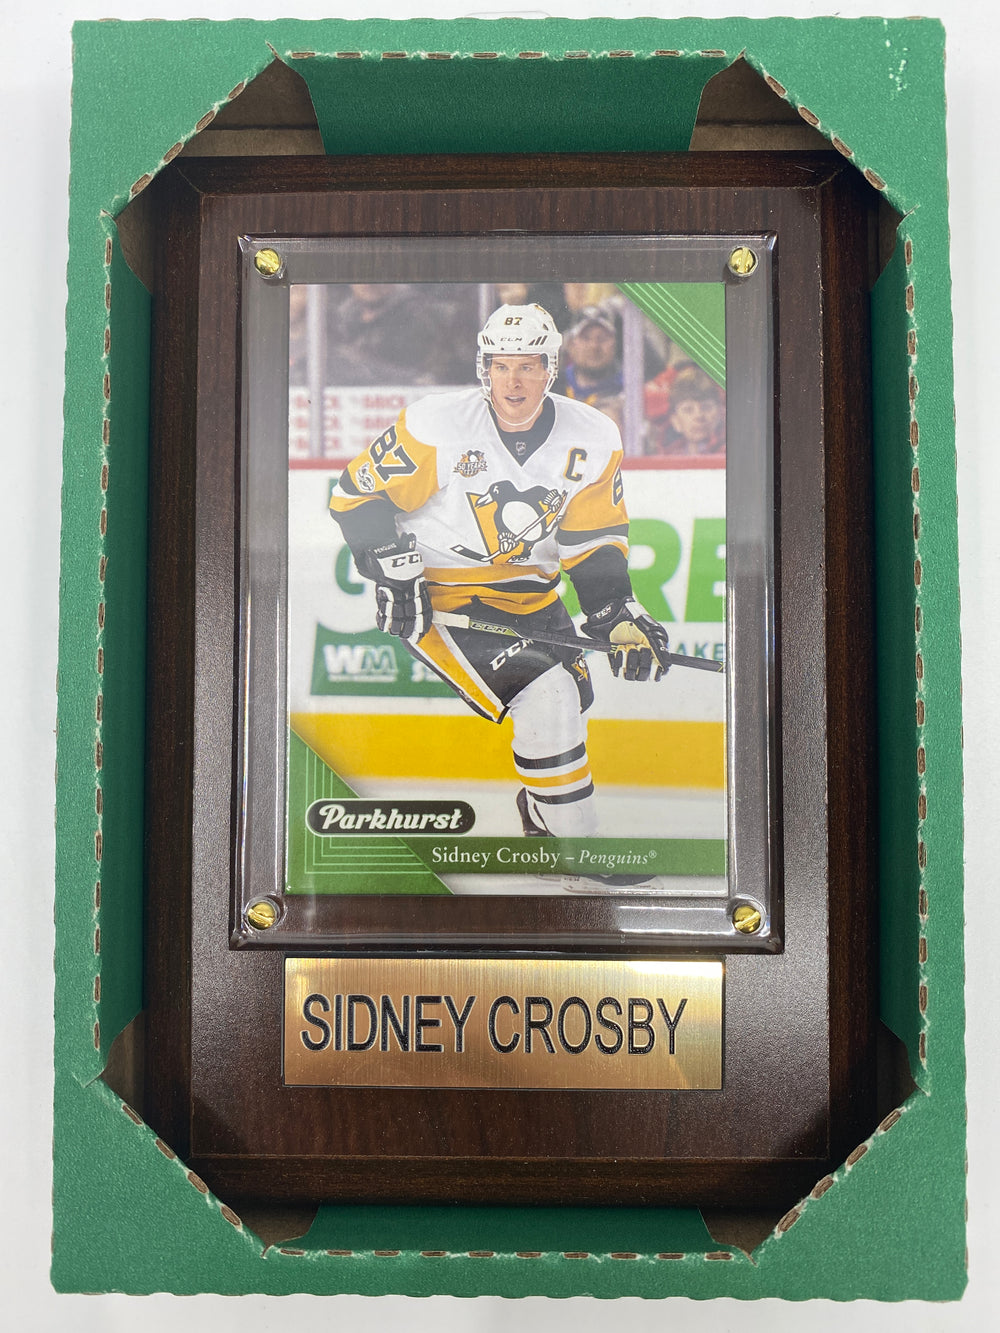 NHL Plaque with card 4x6 Penguins Sidney Crosby